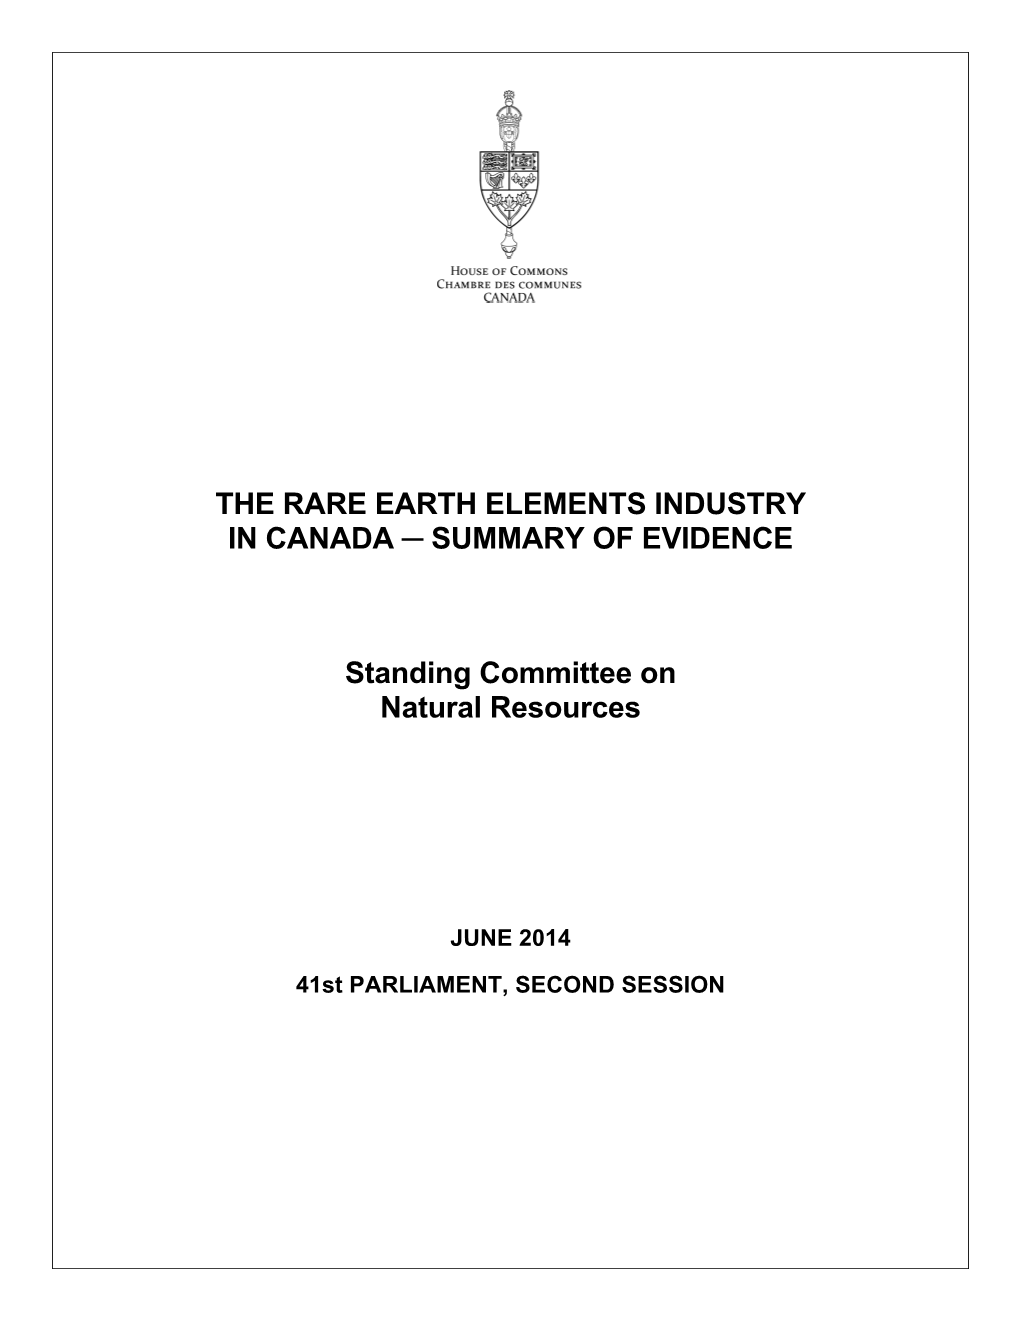 The Rare Earth Elements Industry in Canada ─ Summary of Evidence